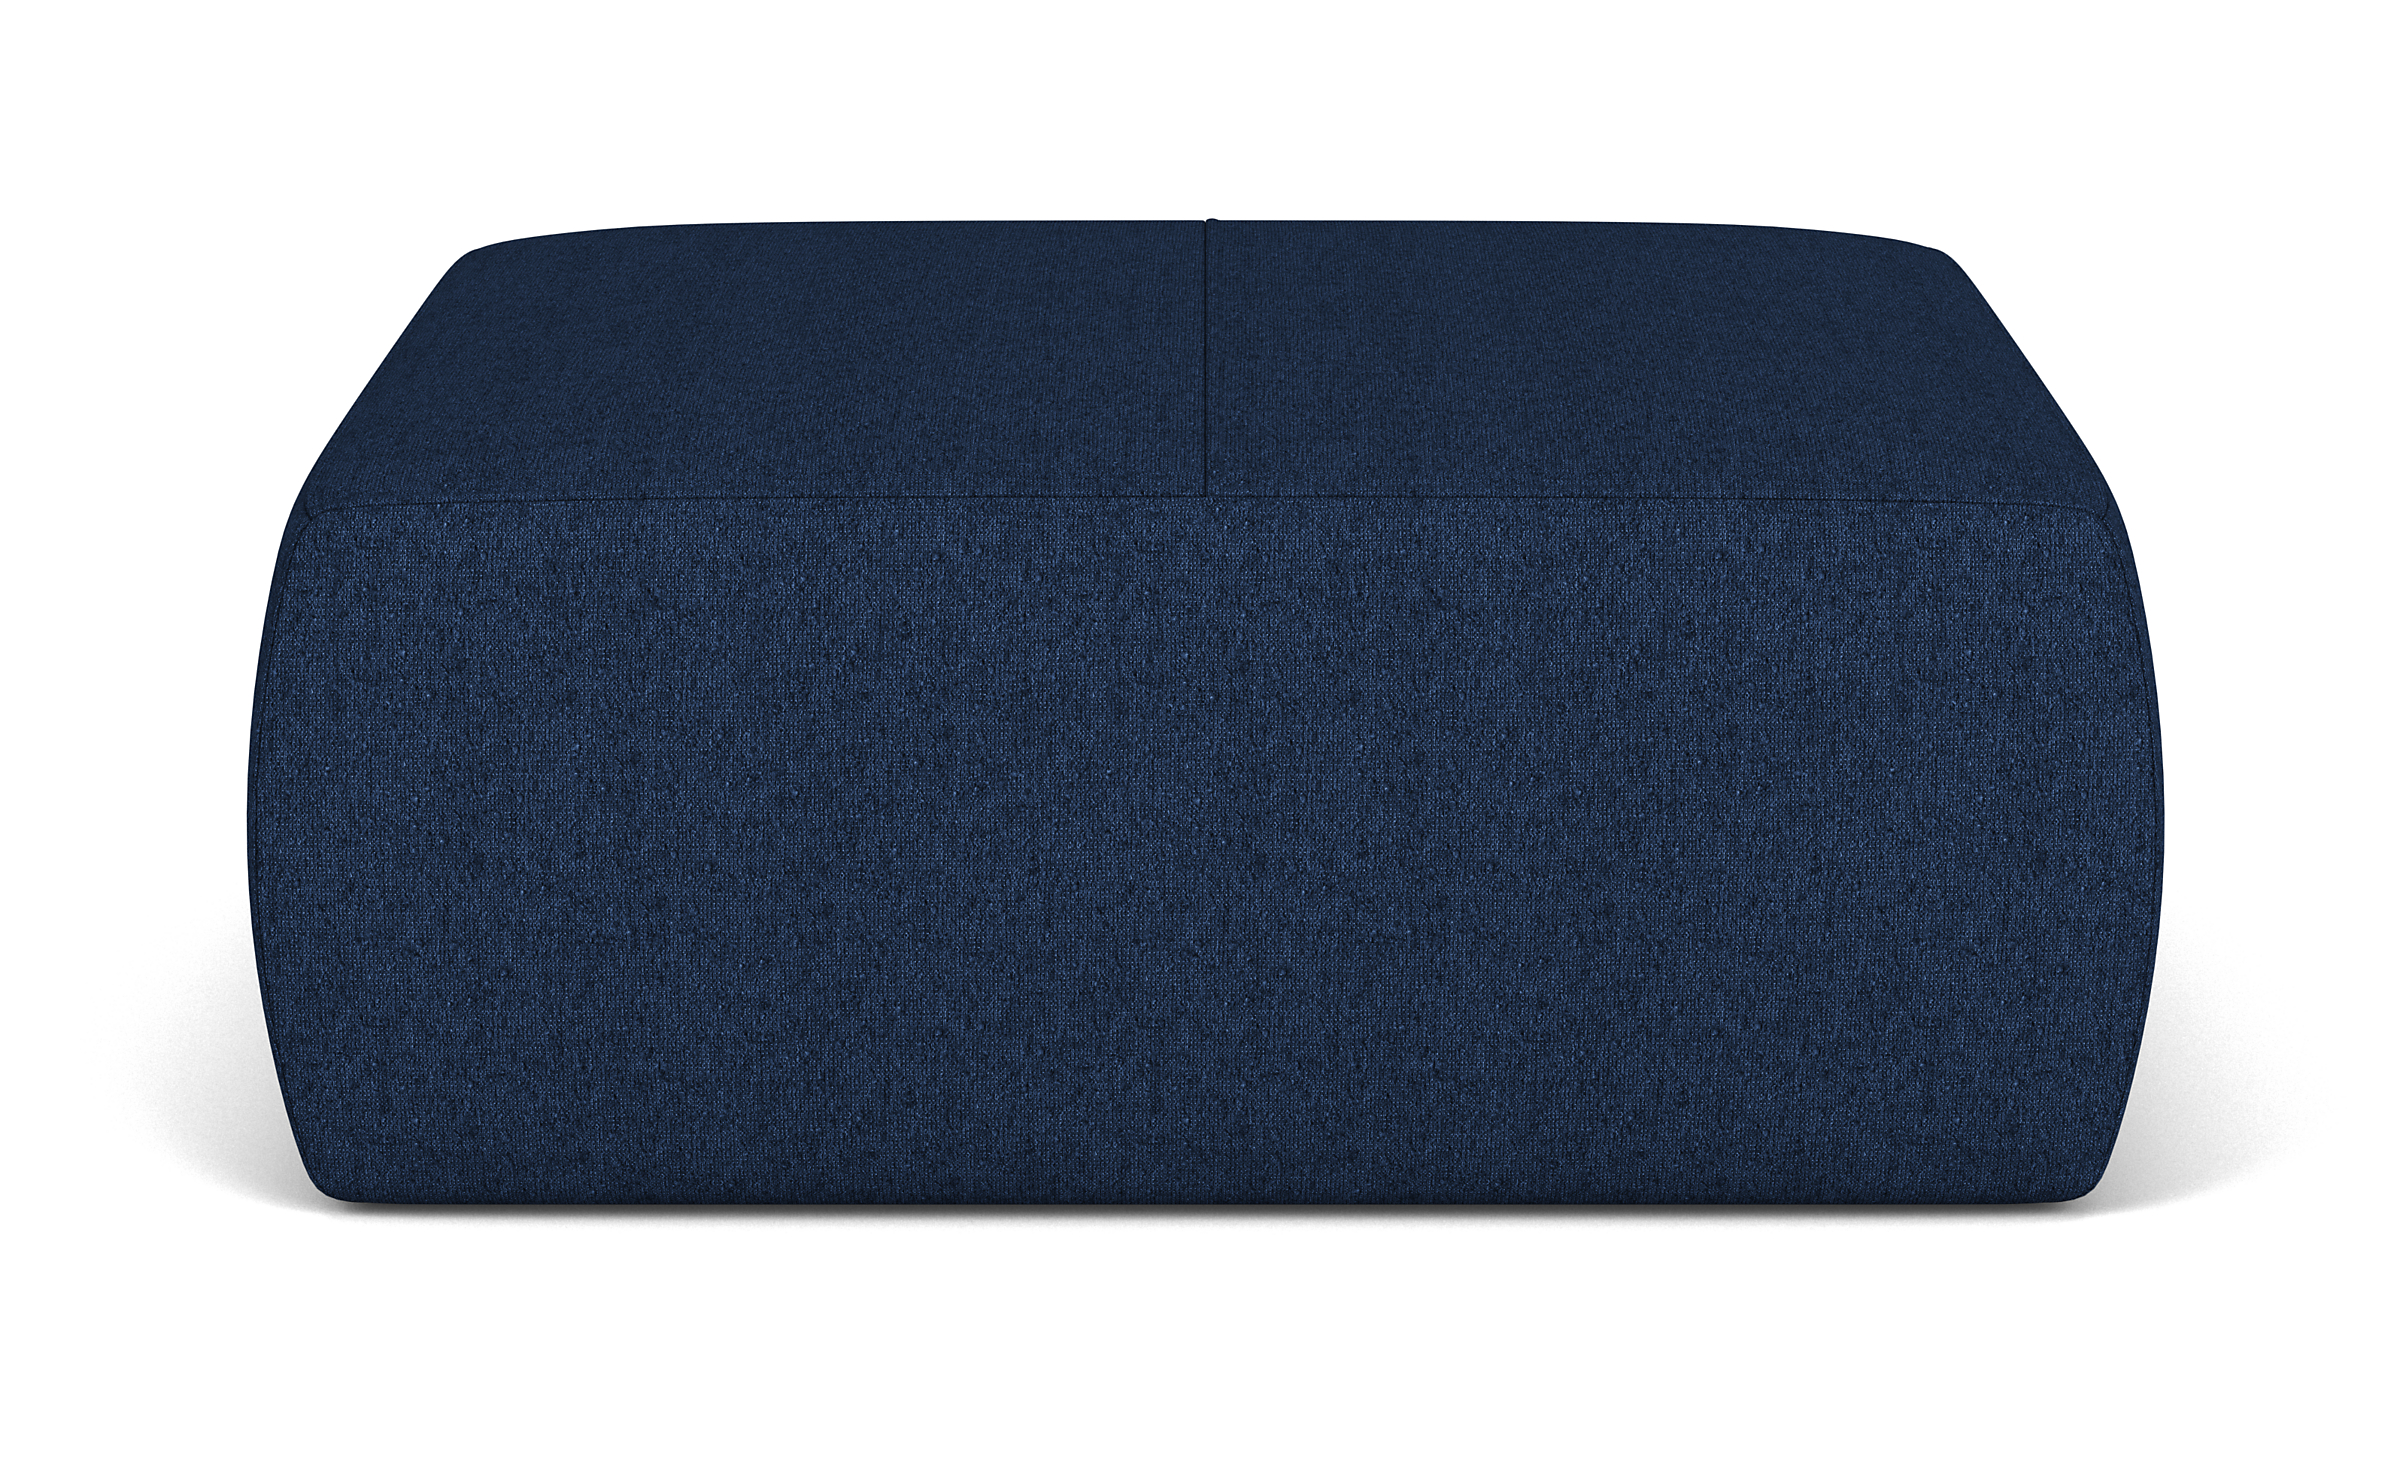 Lind 36w 36d 16h Square Ottoman in Declan Ink